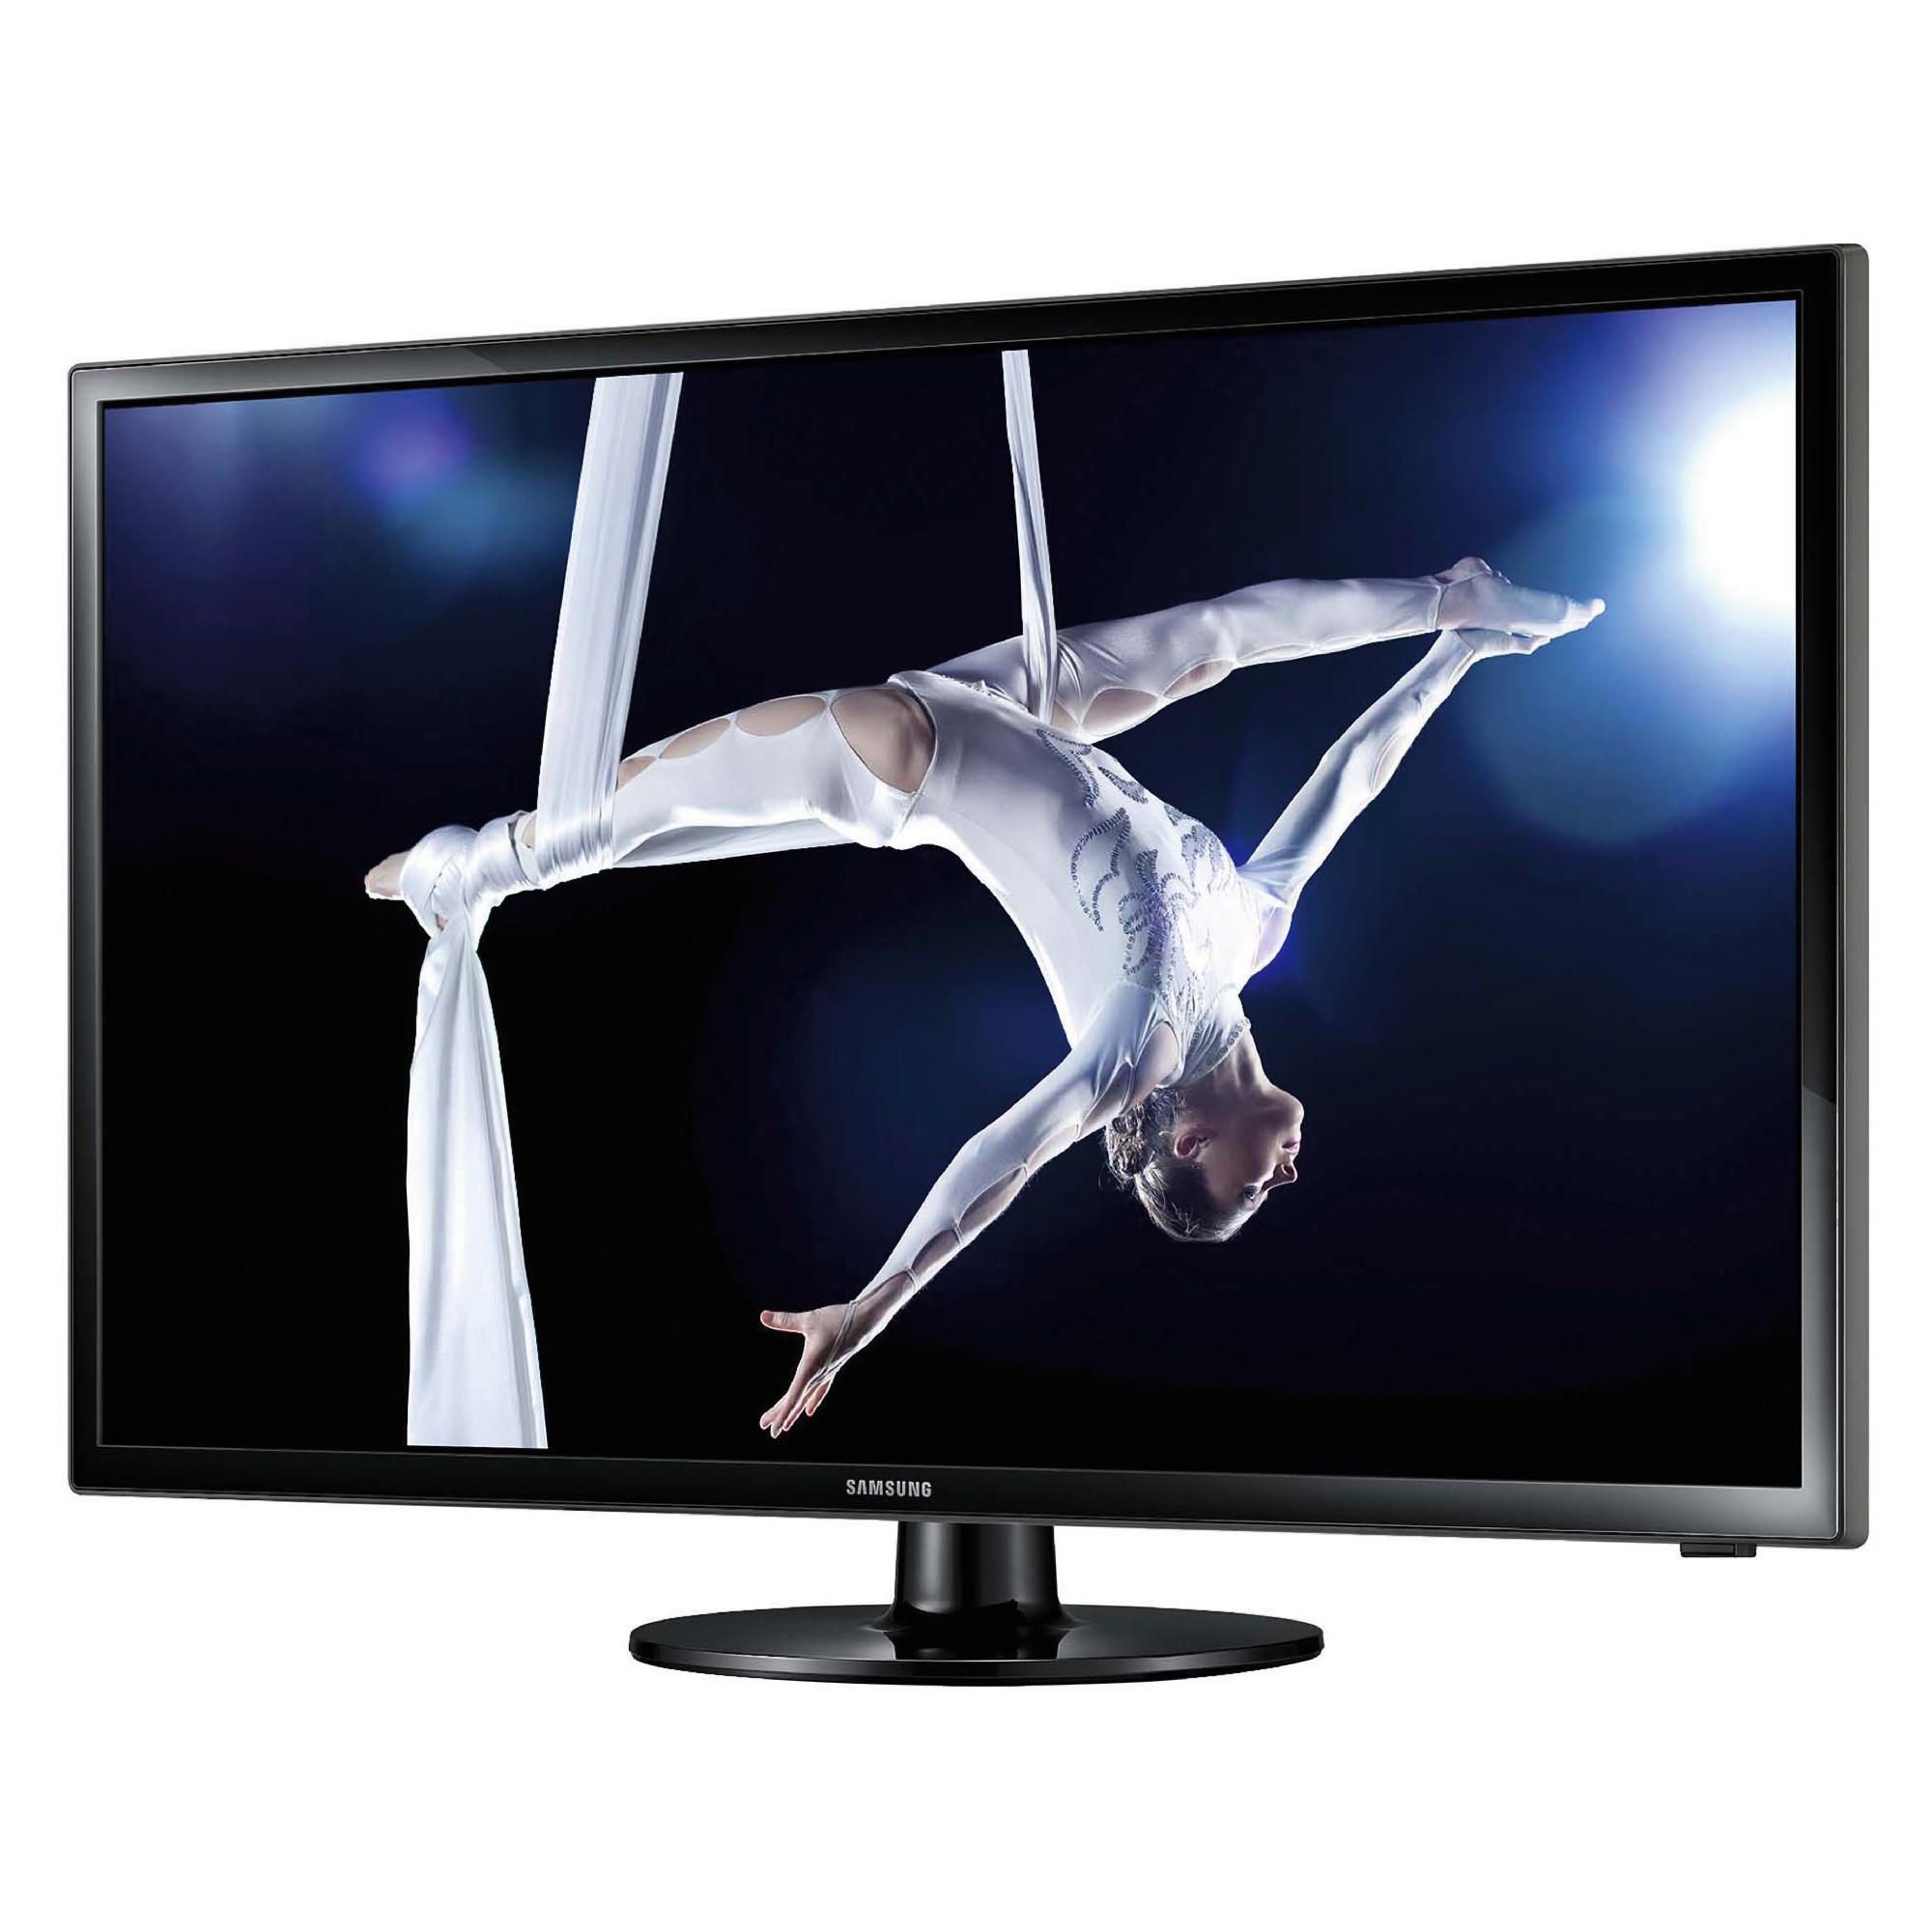 Samsung UE28F4000 28 Inch HD Ready 720P LED TV with Freeview